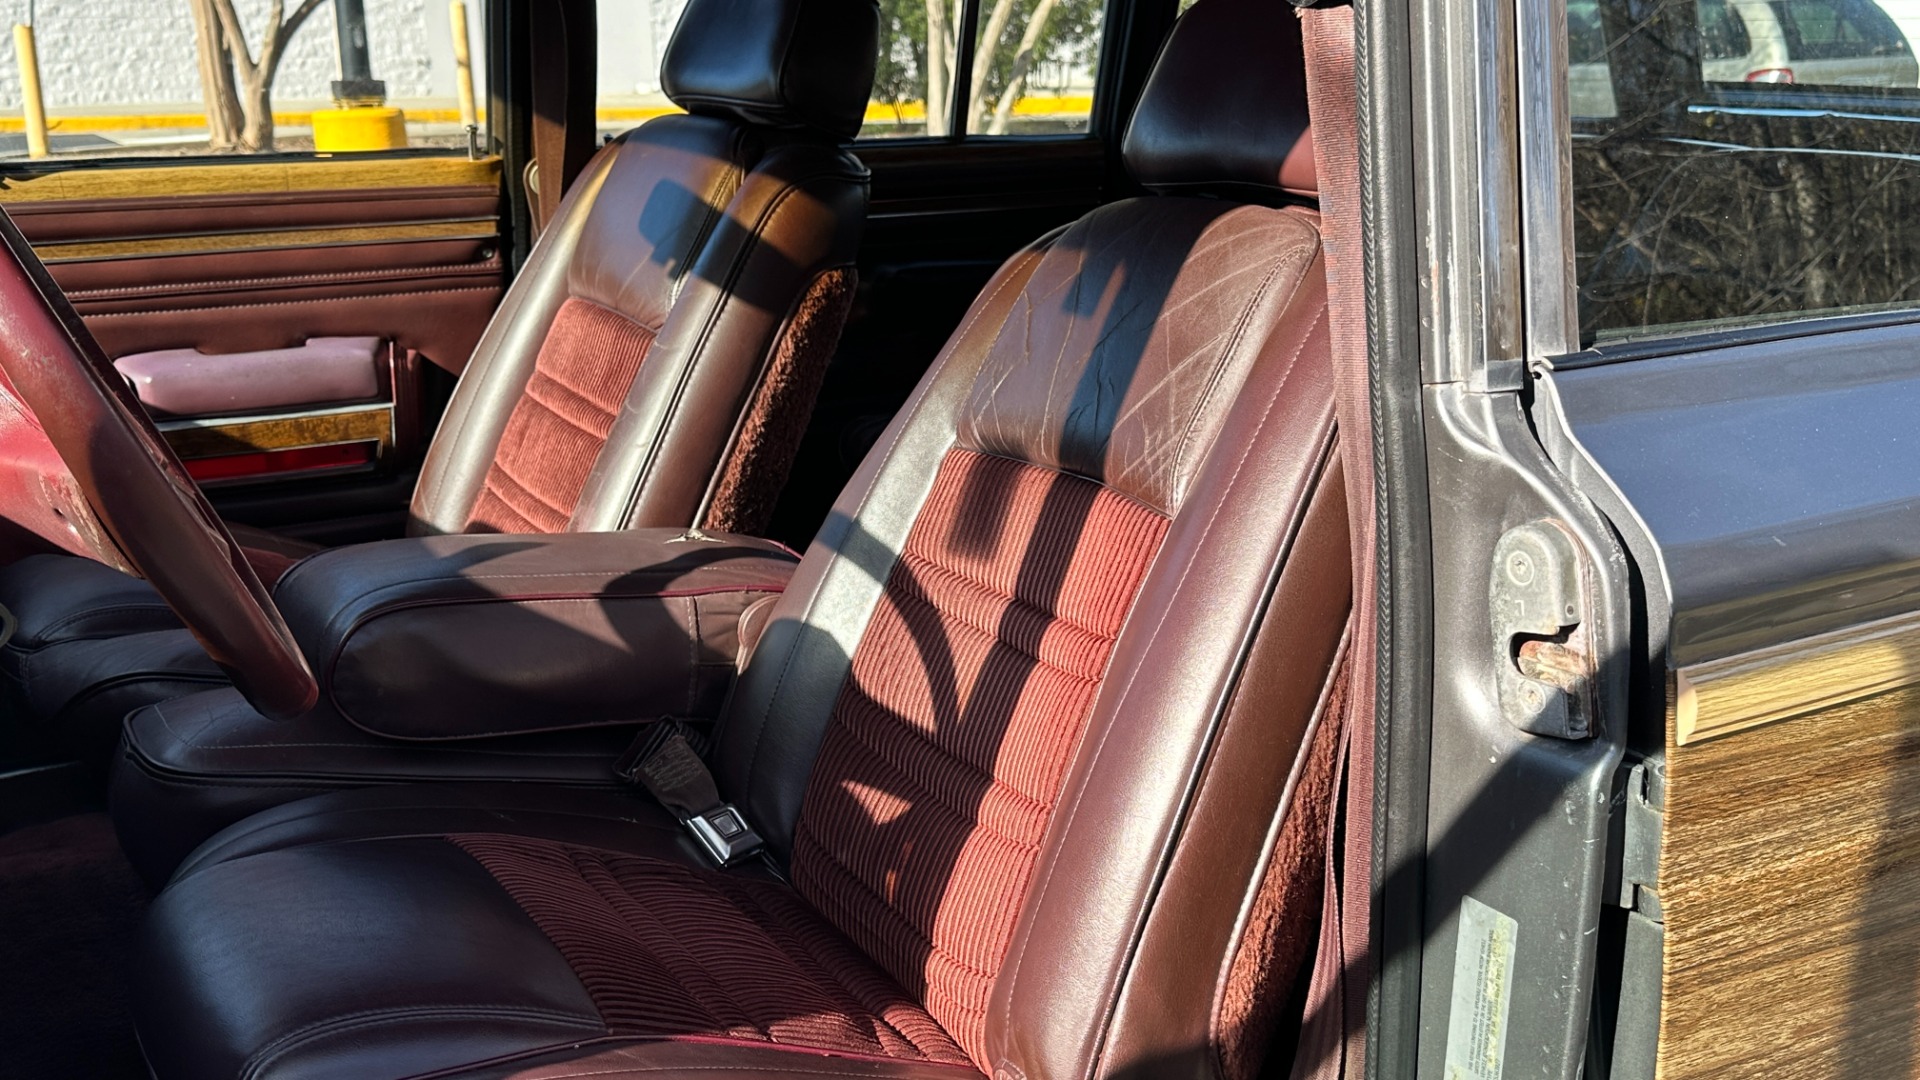 Used 1988 Jeep Grand Wagoneer 5.9L V8 ENGINE / LEATHER AND CLOTH / WOOD SIDING / 4WD for sale $21,995 at Formula Imports in Charlotte NC 28227 66